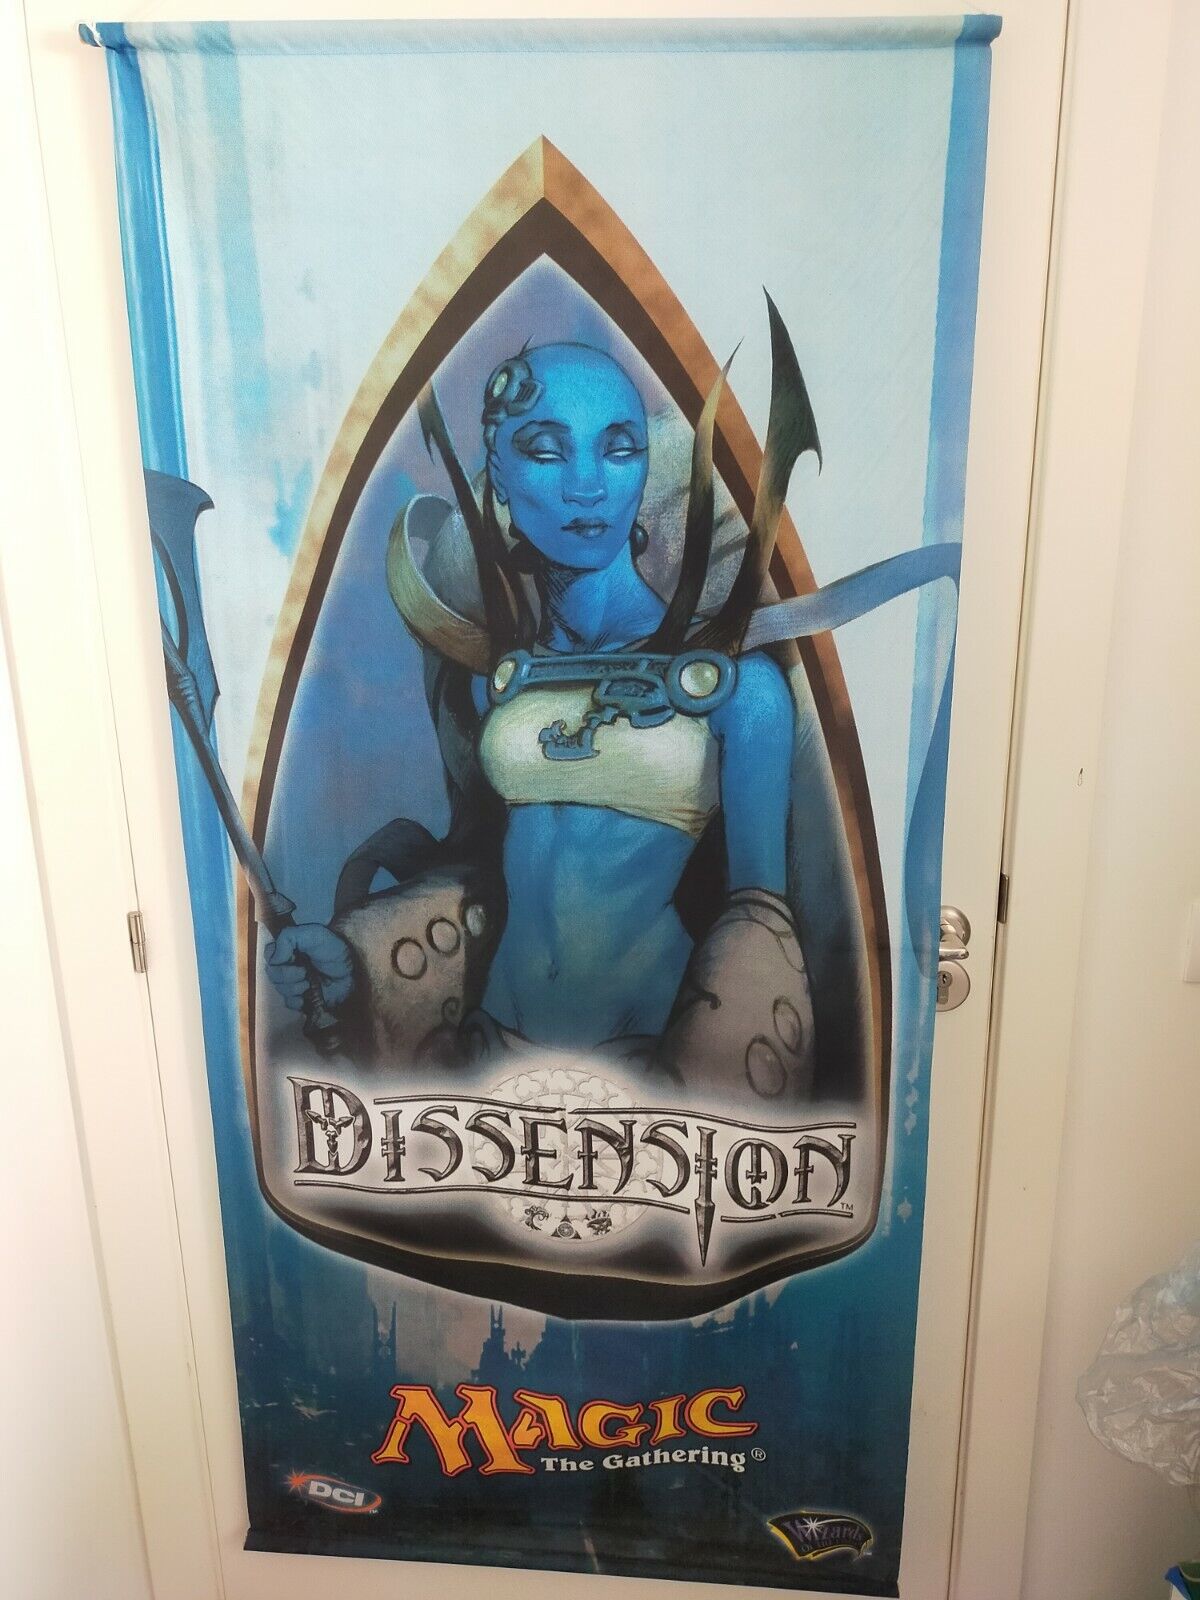 Wall Scroll Dissension Magic The Gathering Size 59 1/8x35 3/8in